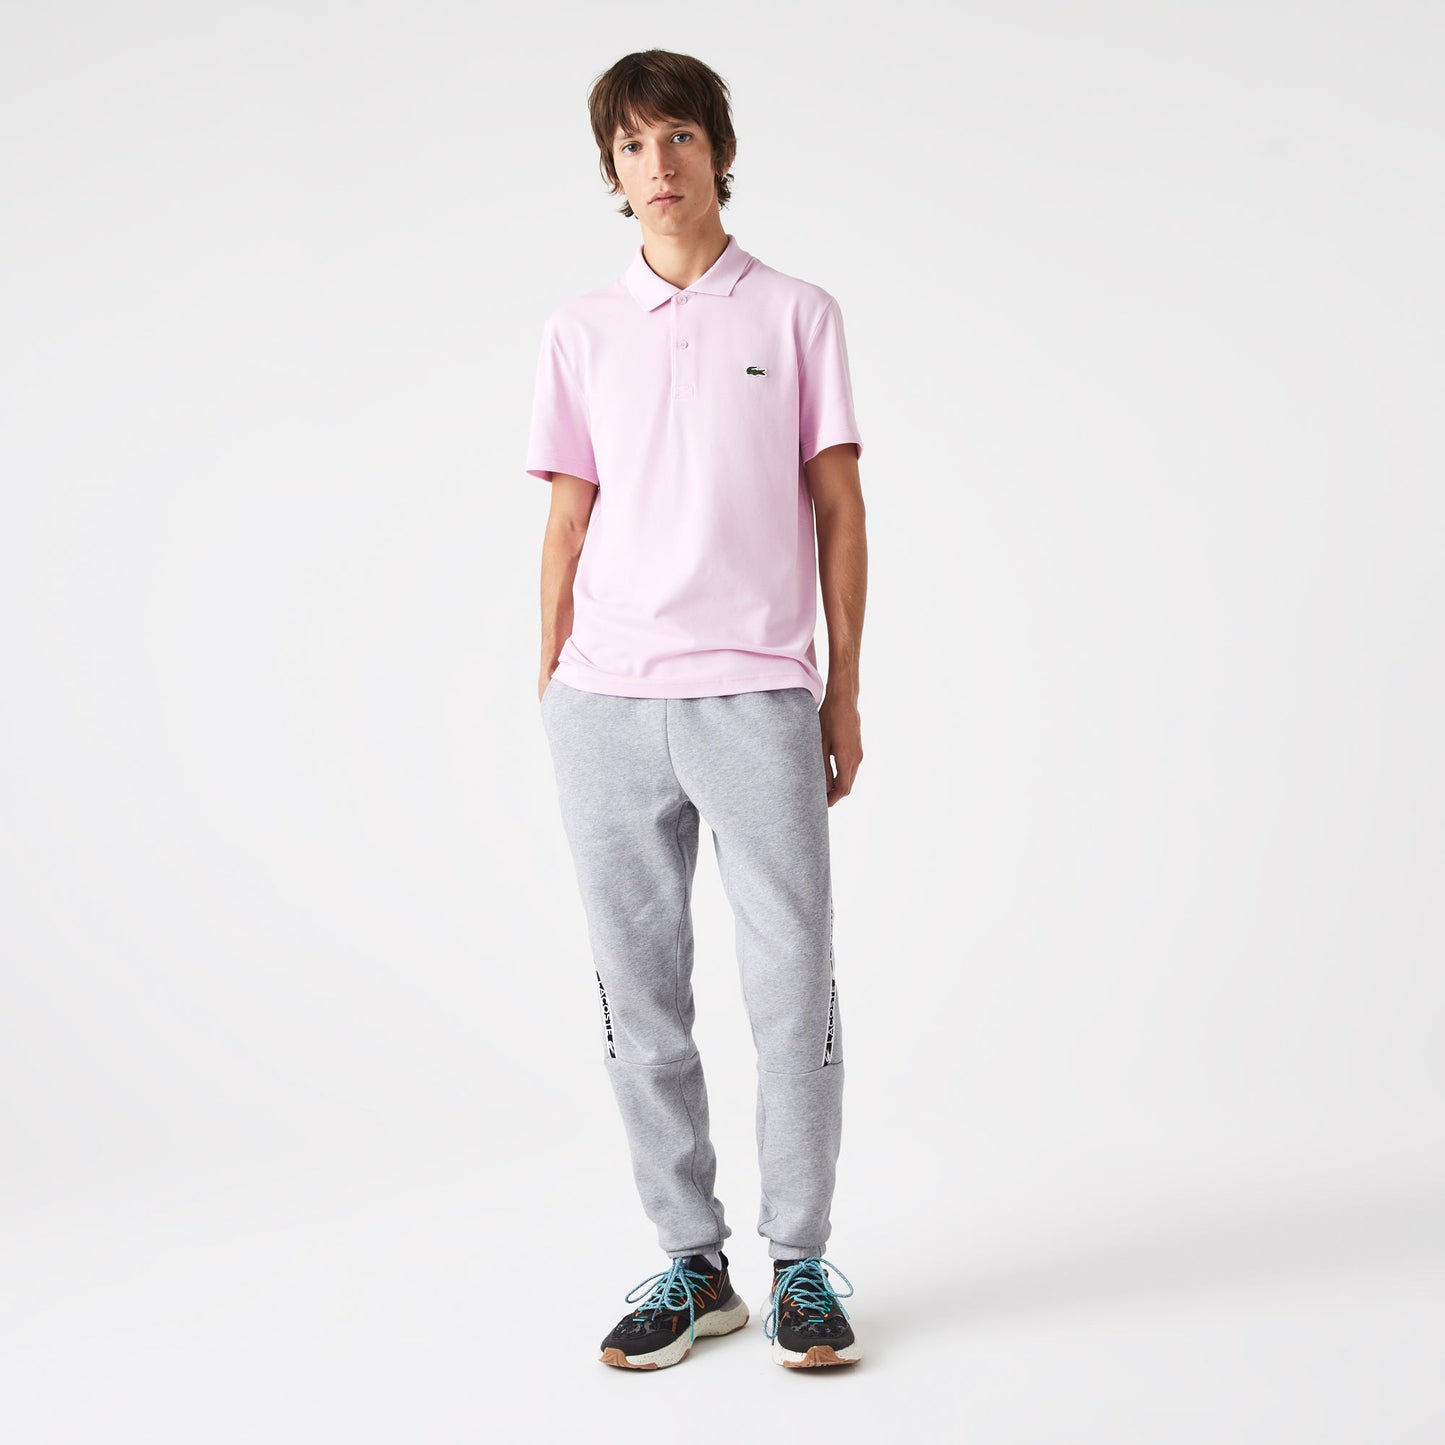 Men's Lacoste Printed Bands Trackpants - XH9888